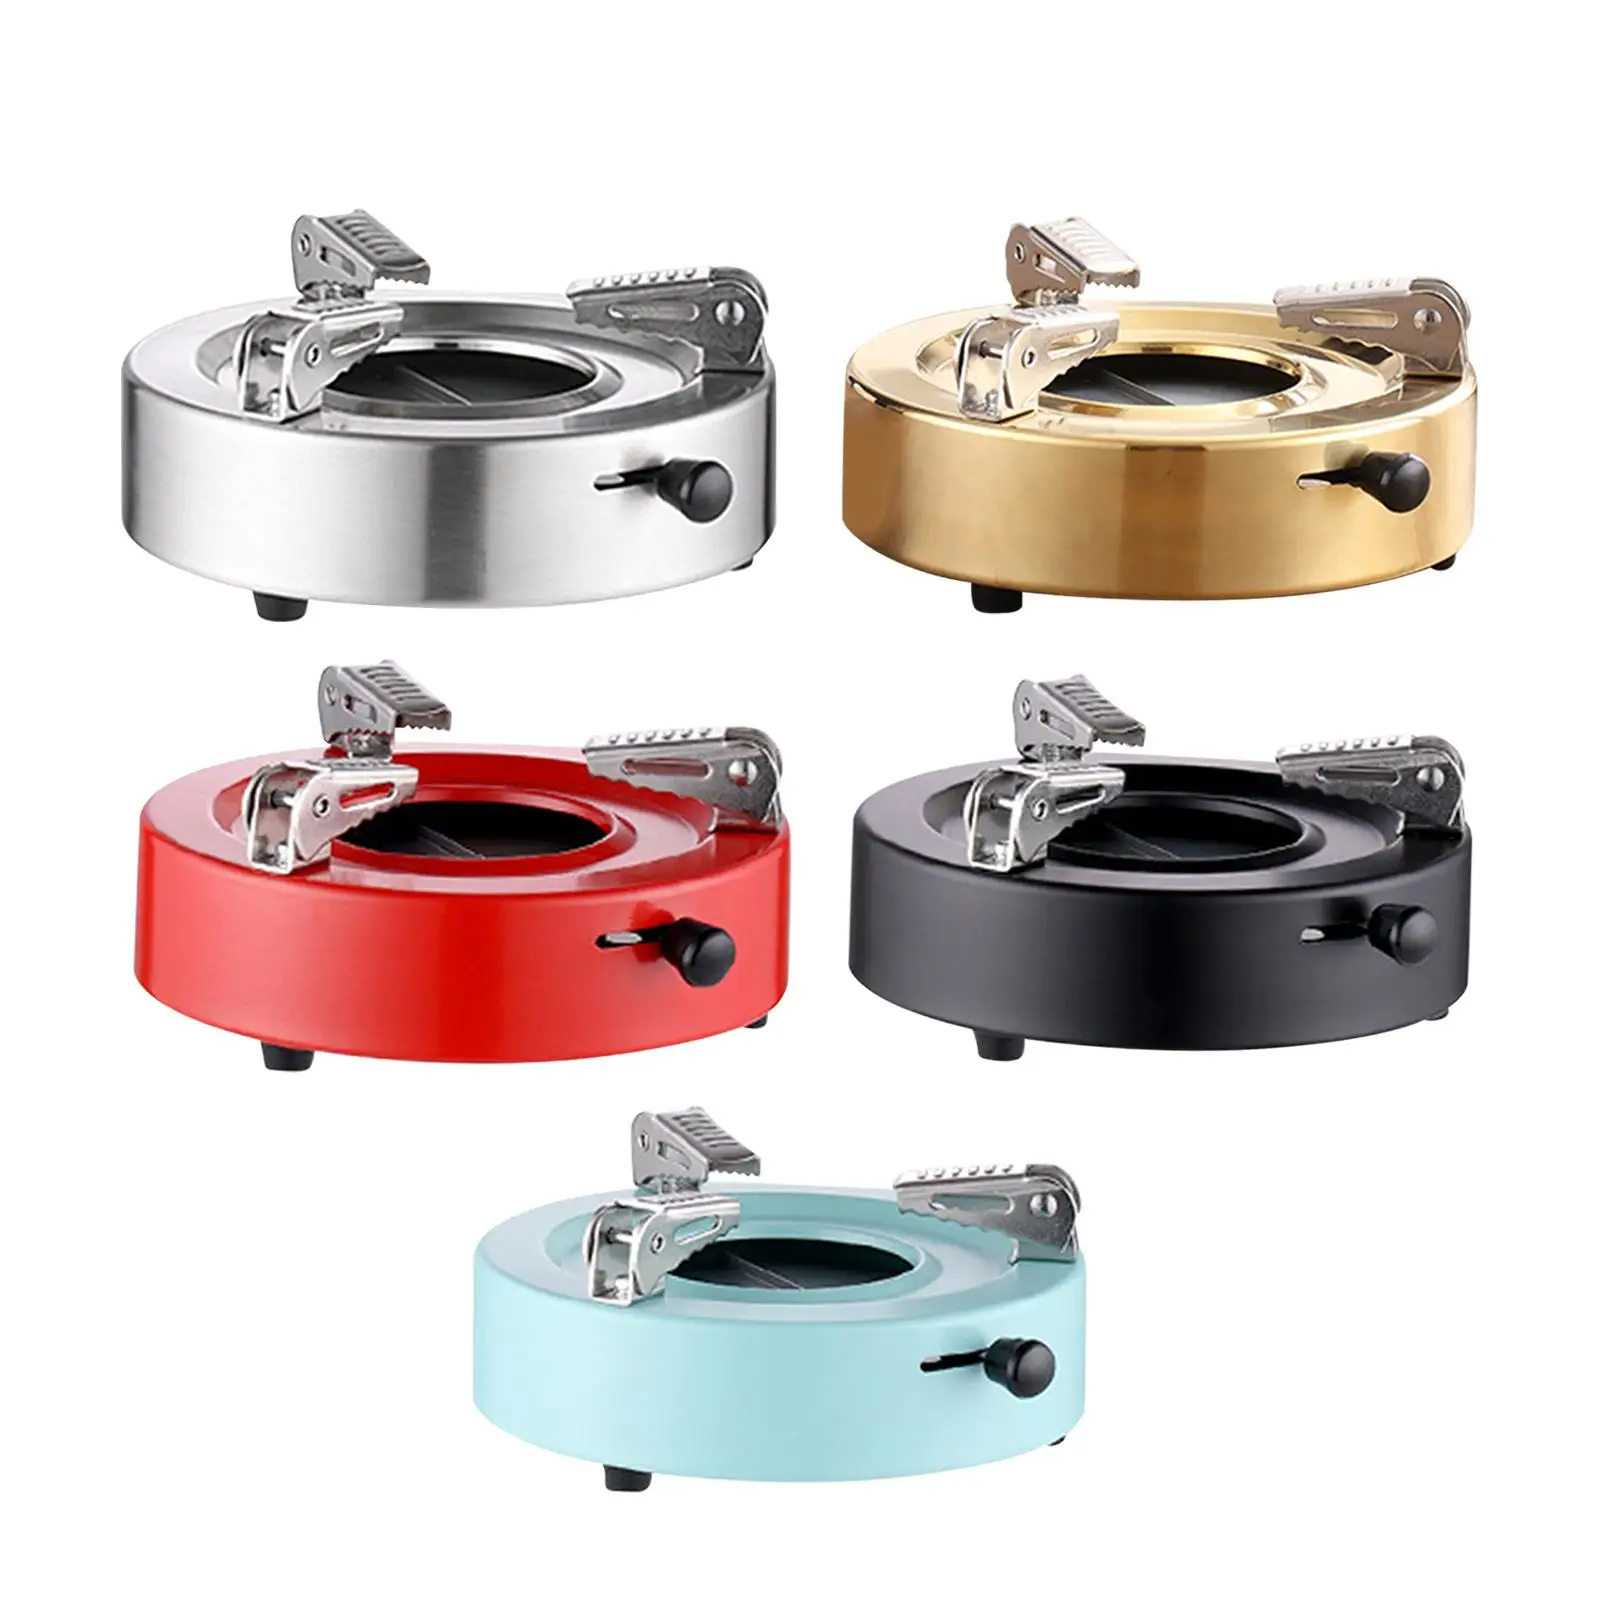 Alcohol Stove Stable Lightweight Camping Stove Spirit Burner for Camping Cooking